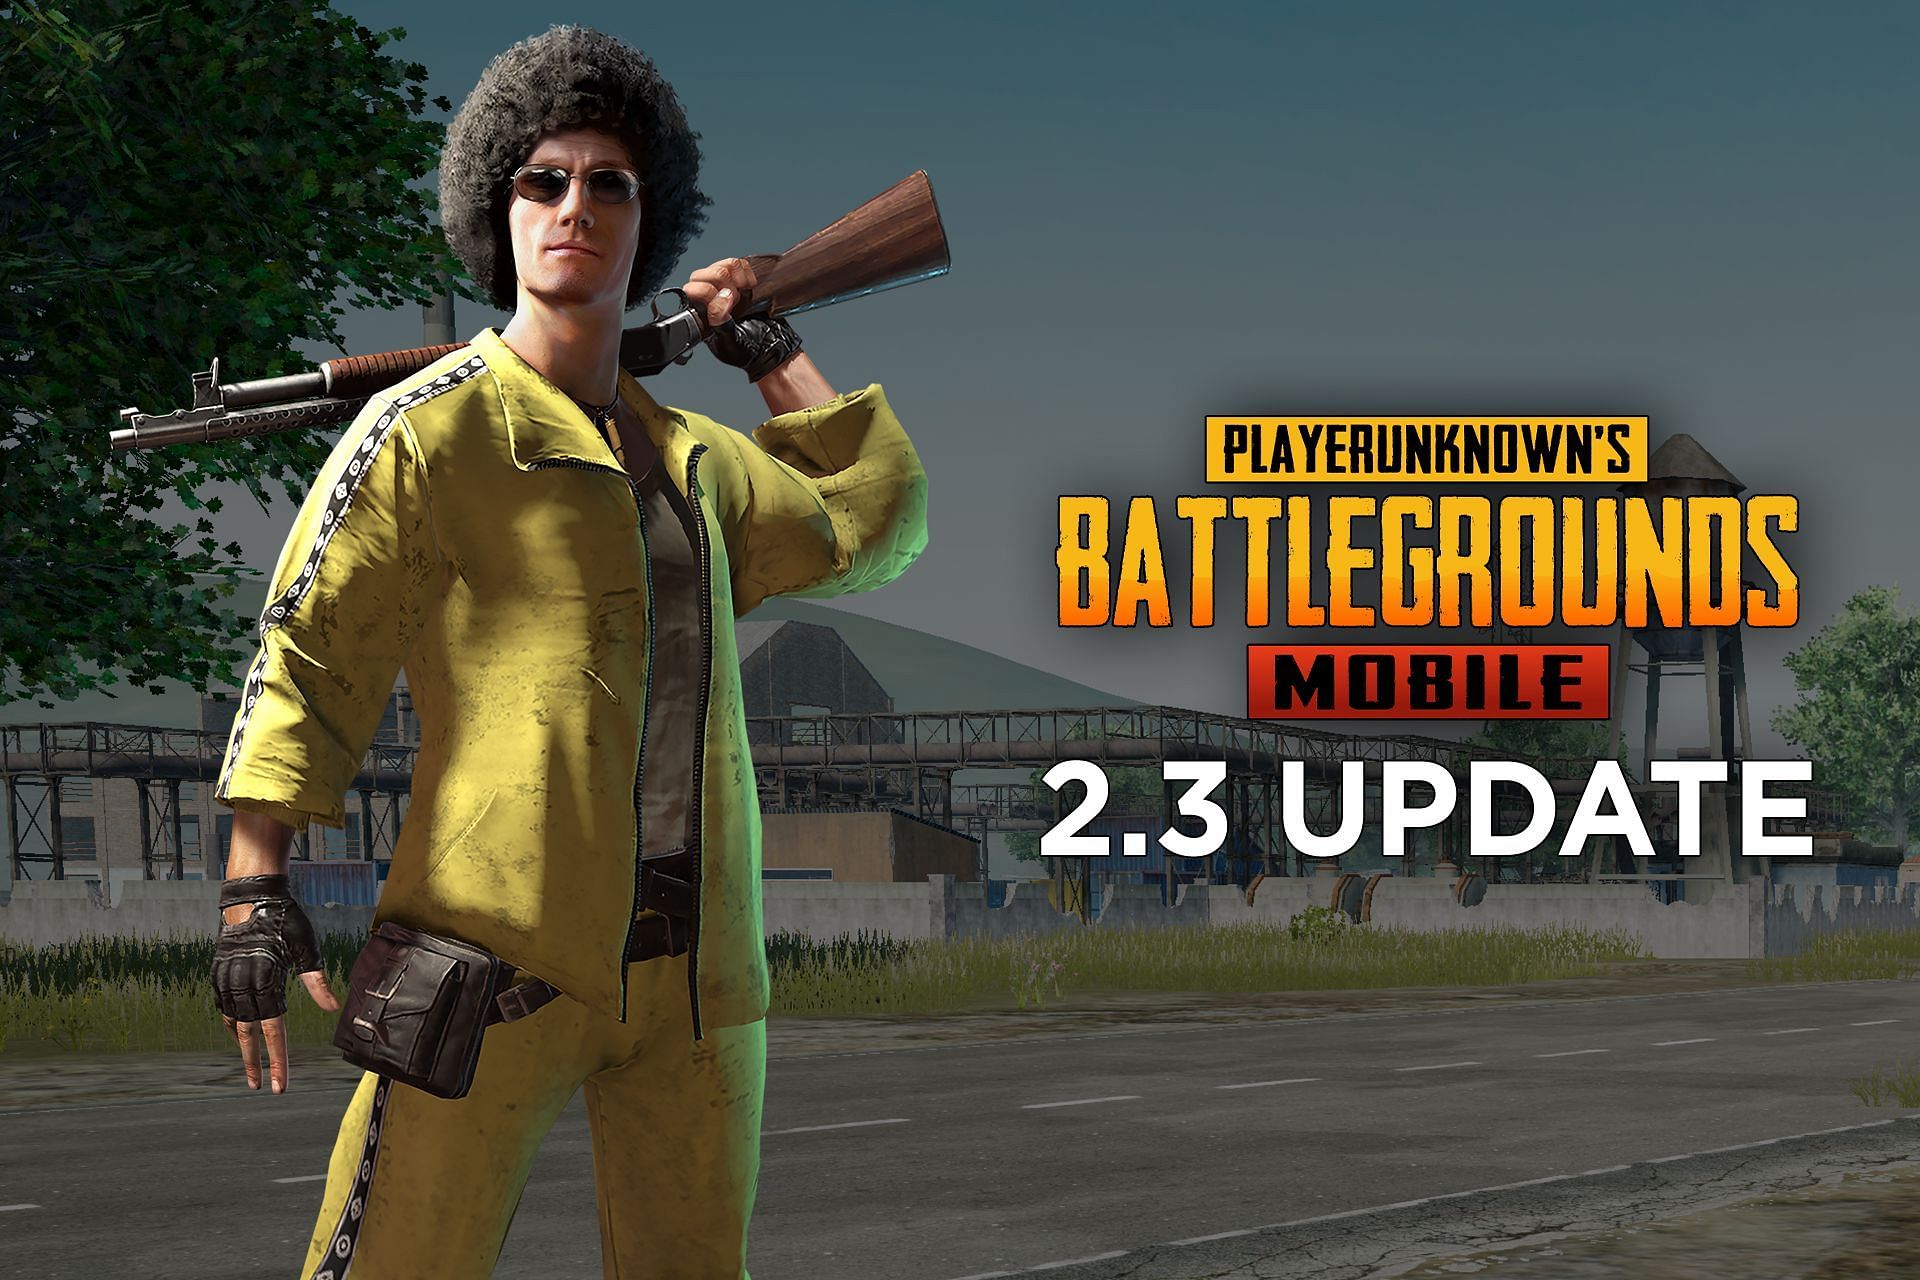 You can easily download the 2.3 update of the game (Image via Sportskeeda)